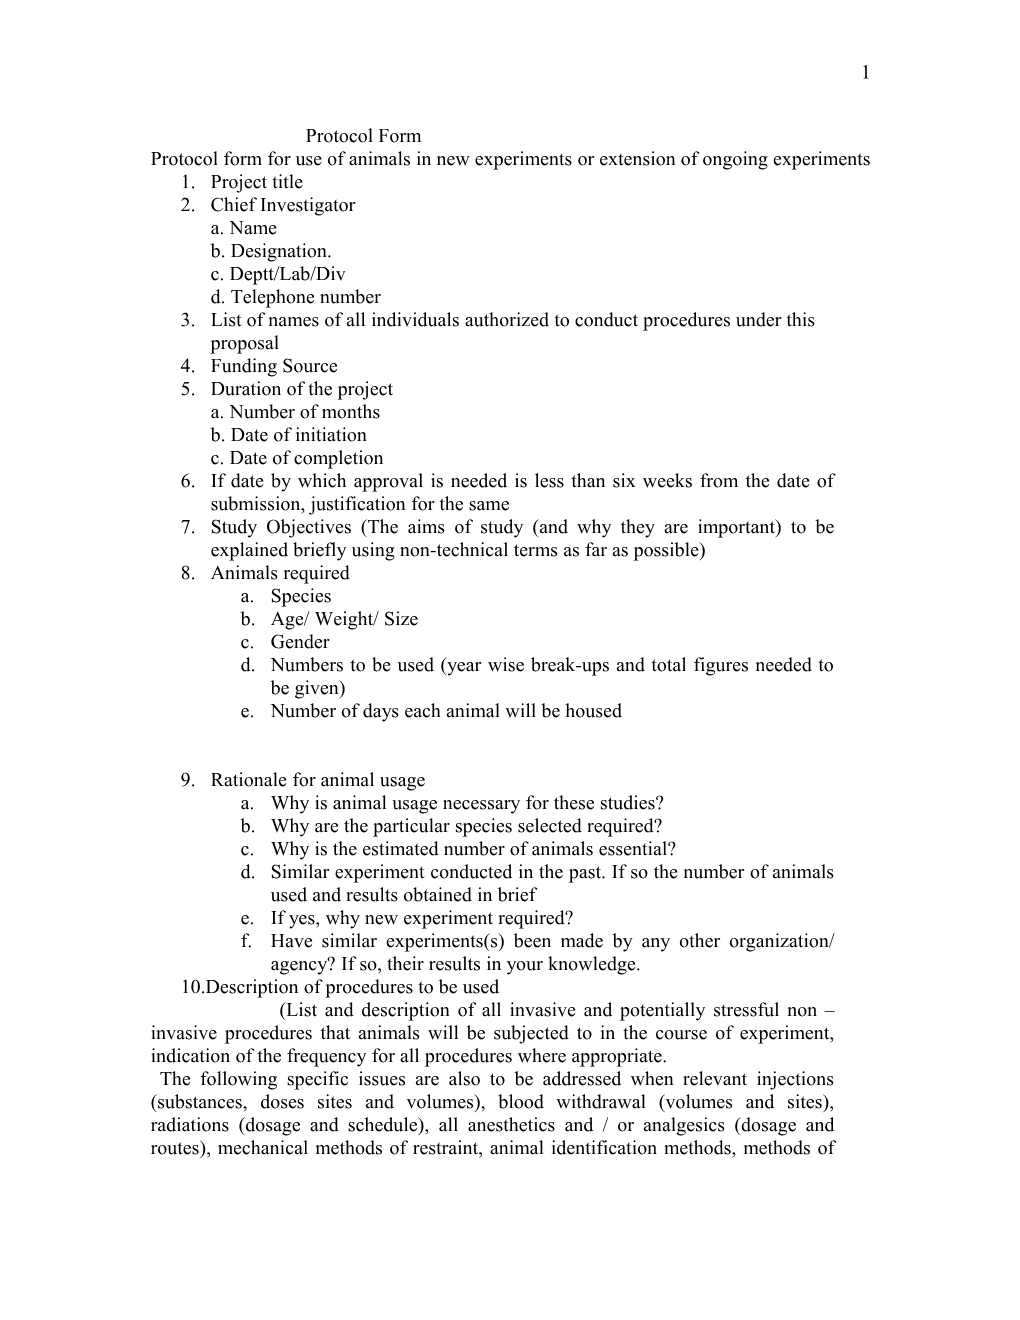 Protocol Form for Use of Animals in New Experiments Or Extension of Ongoing Experiments